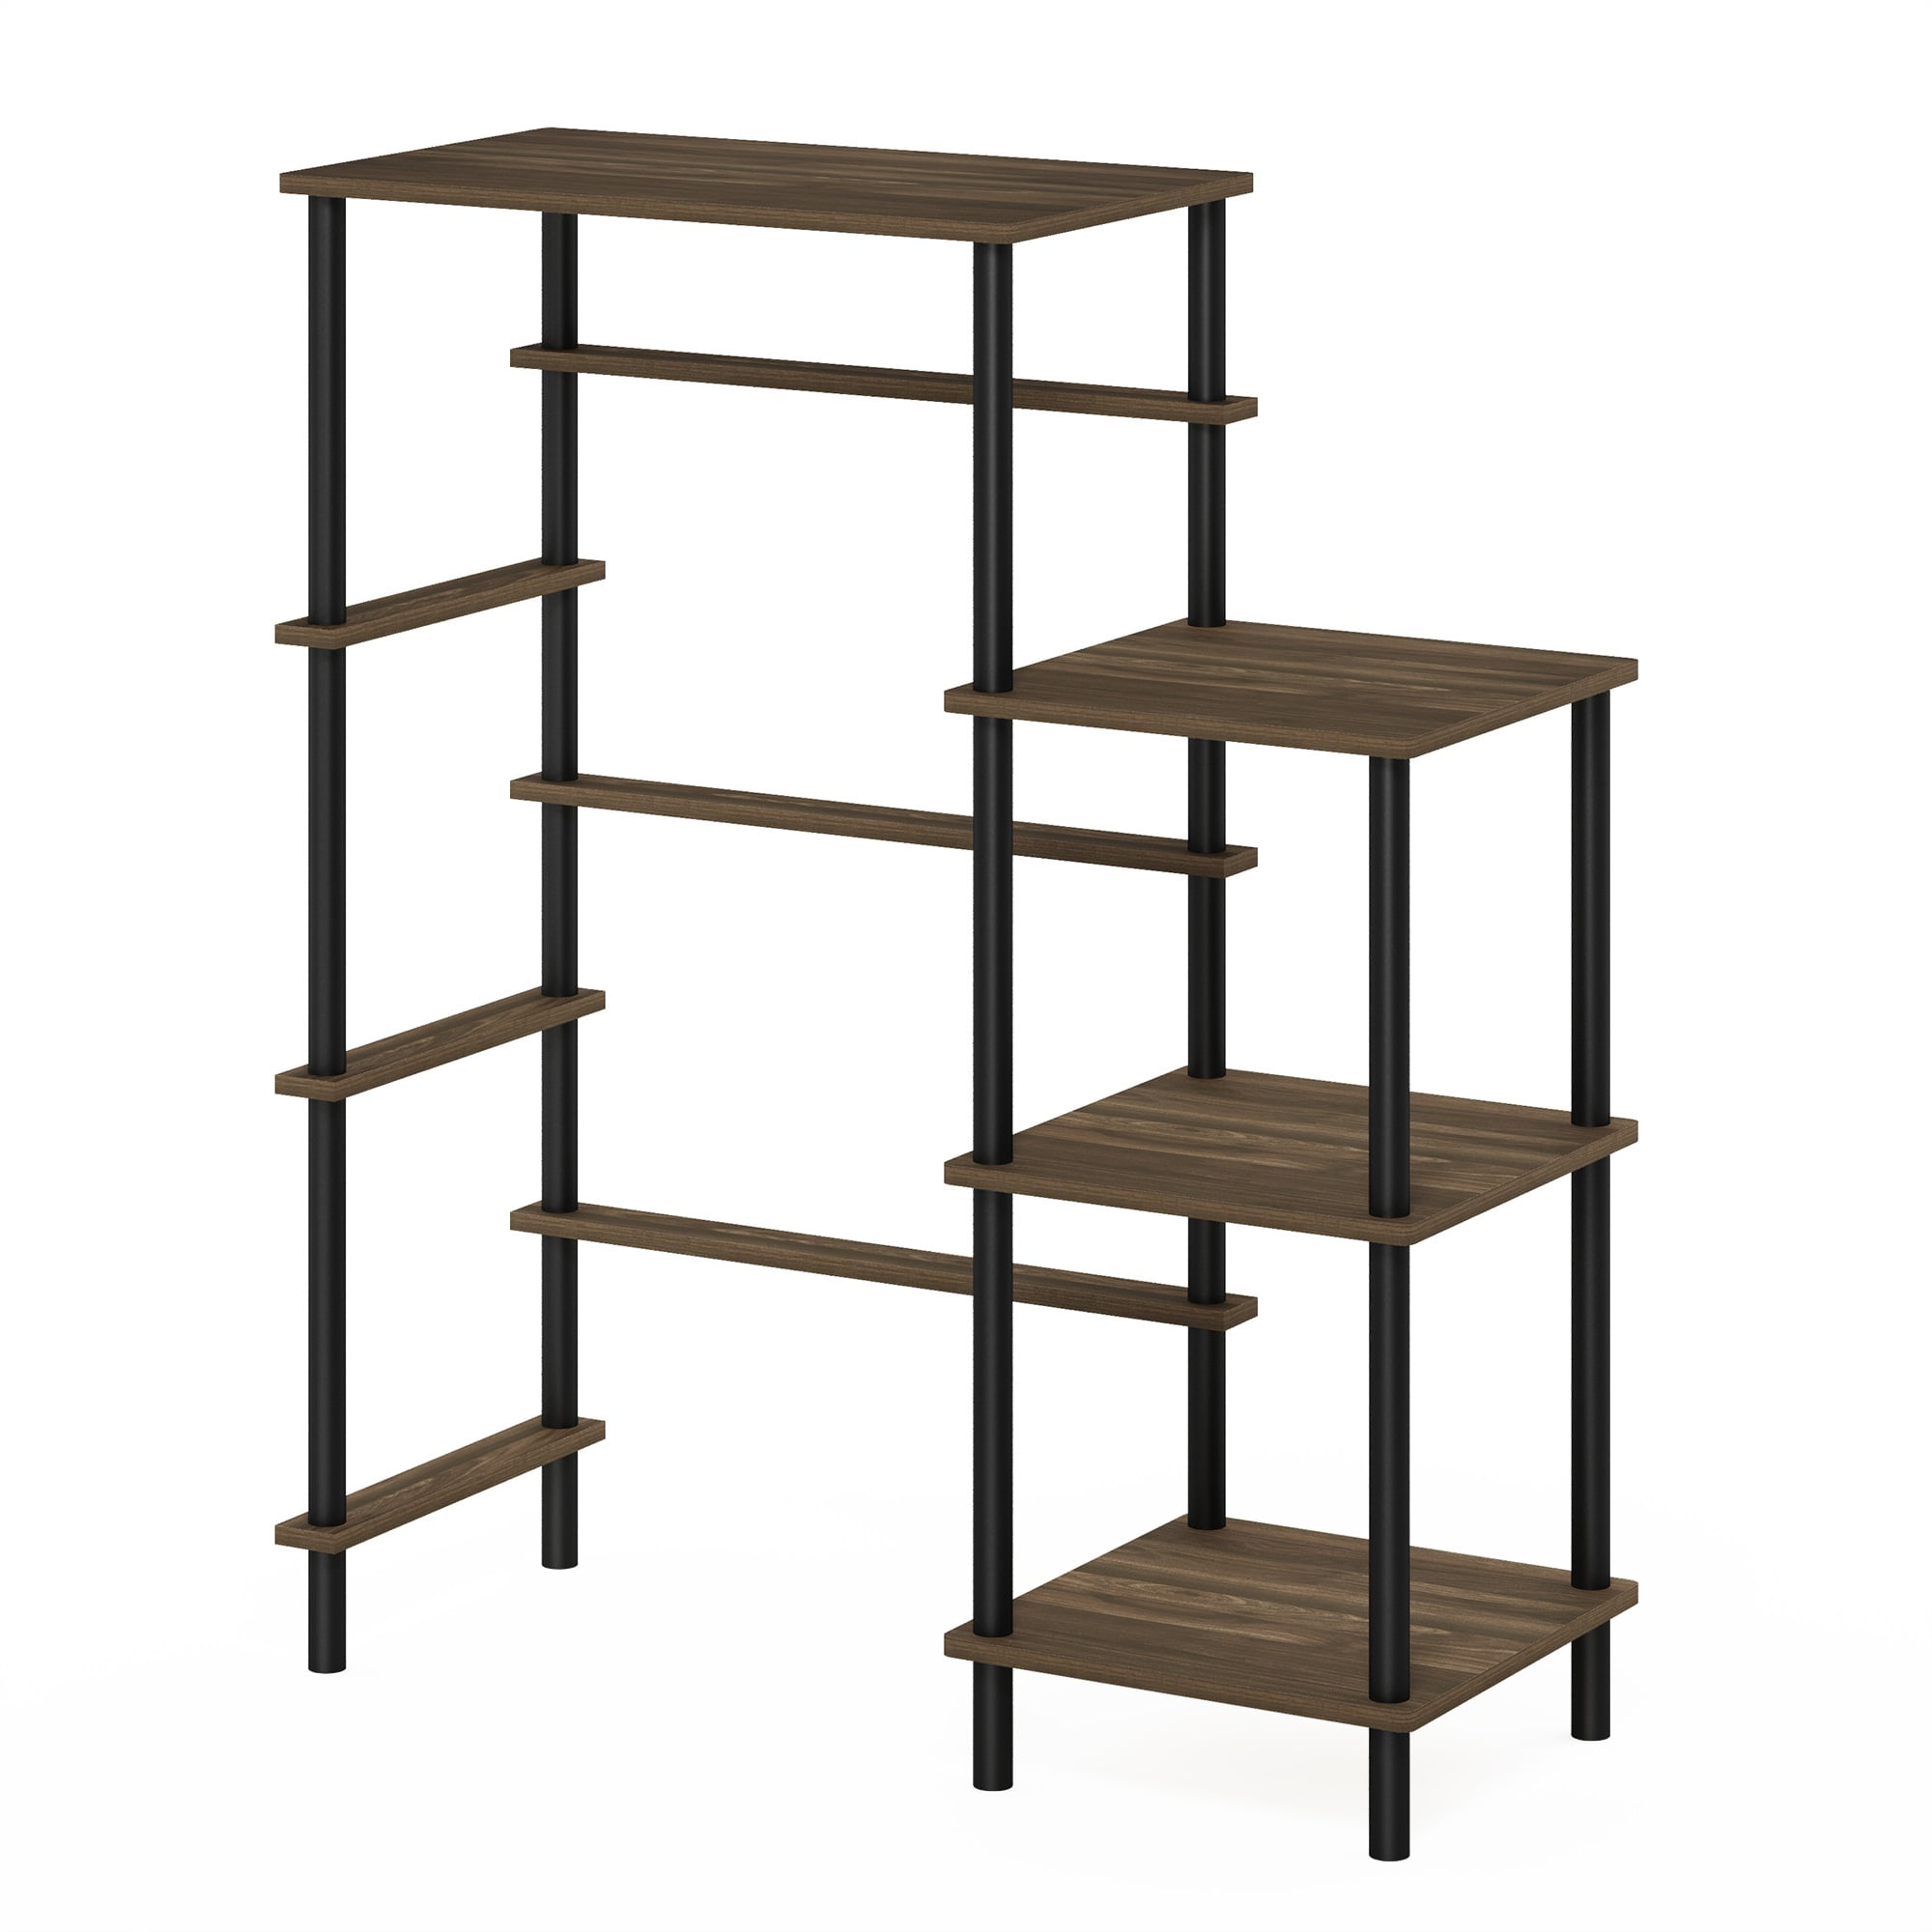 Furinno Toolless Shelves one size Wood Columbia Walnut/Black 